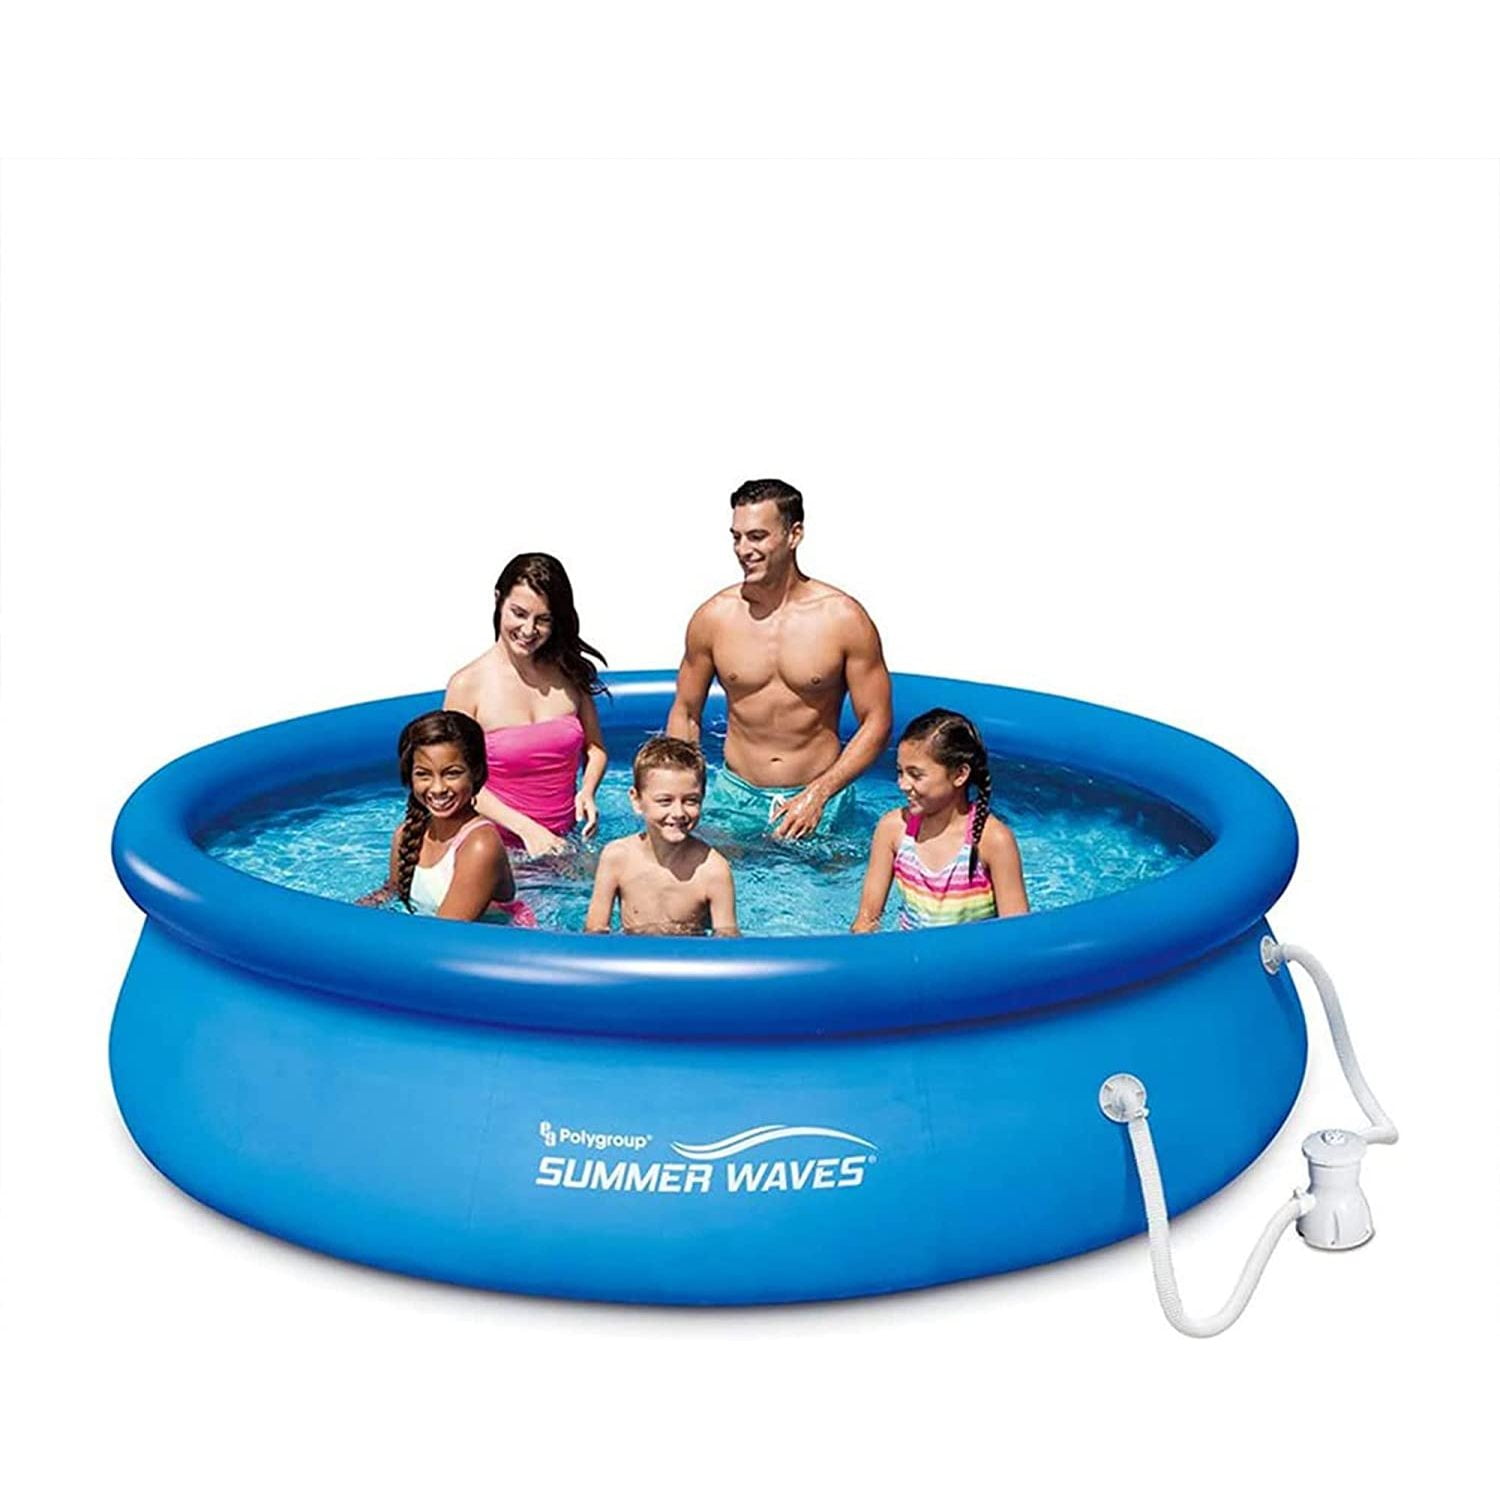 Summer Waves P1001030A Quick Set 2.5ft 10ft Inflatable Outdoor GFCI Outdoor with RX300 Ground Above x System, Blue Pump Swimming Filter Pool Ring